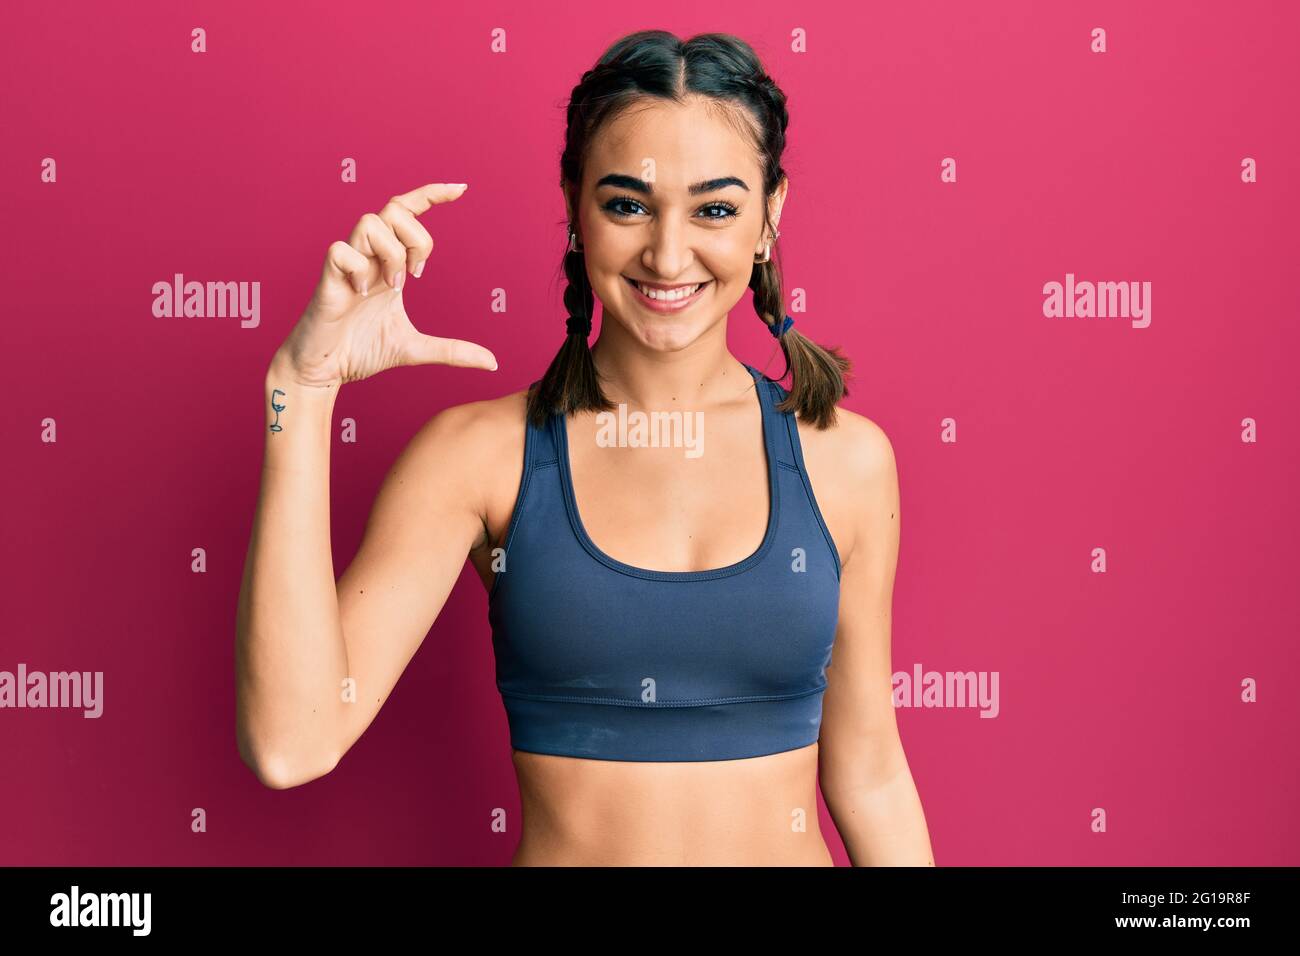 https://c8.alamy.com/comp/2G19R8F/young-brunette-girl-wearing-sportswear-and-braids-smiling-and-confident-gesturing-with-hand-doing-small-size-sign-with-fingers-looking-and-the-camera-2G19R8F.jpg